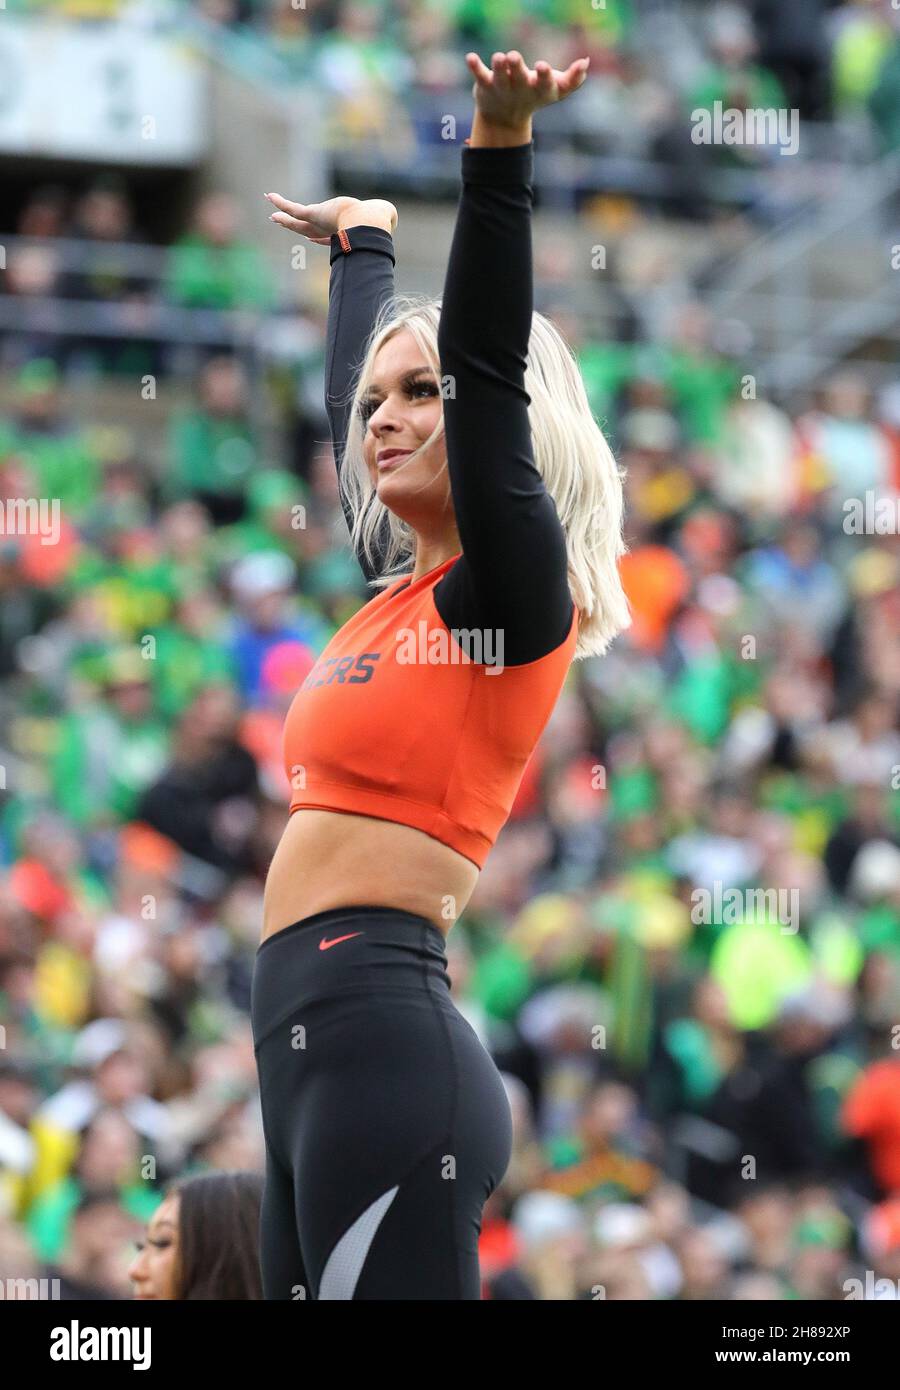 Oregon state beavers cheerleaders 2021 hires stock photography and